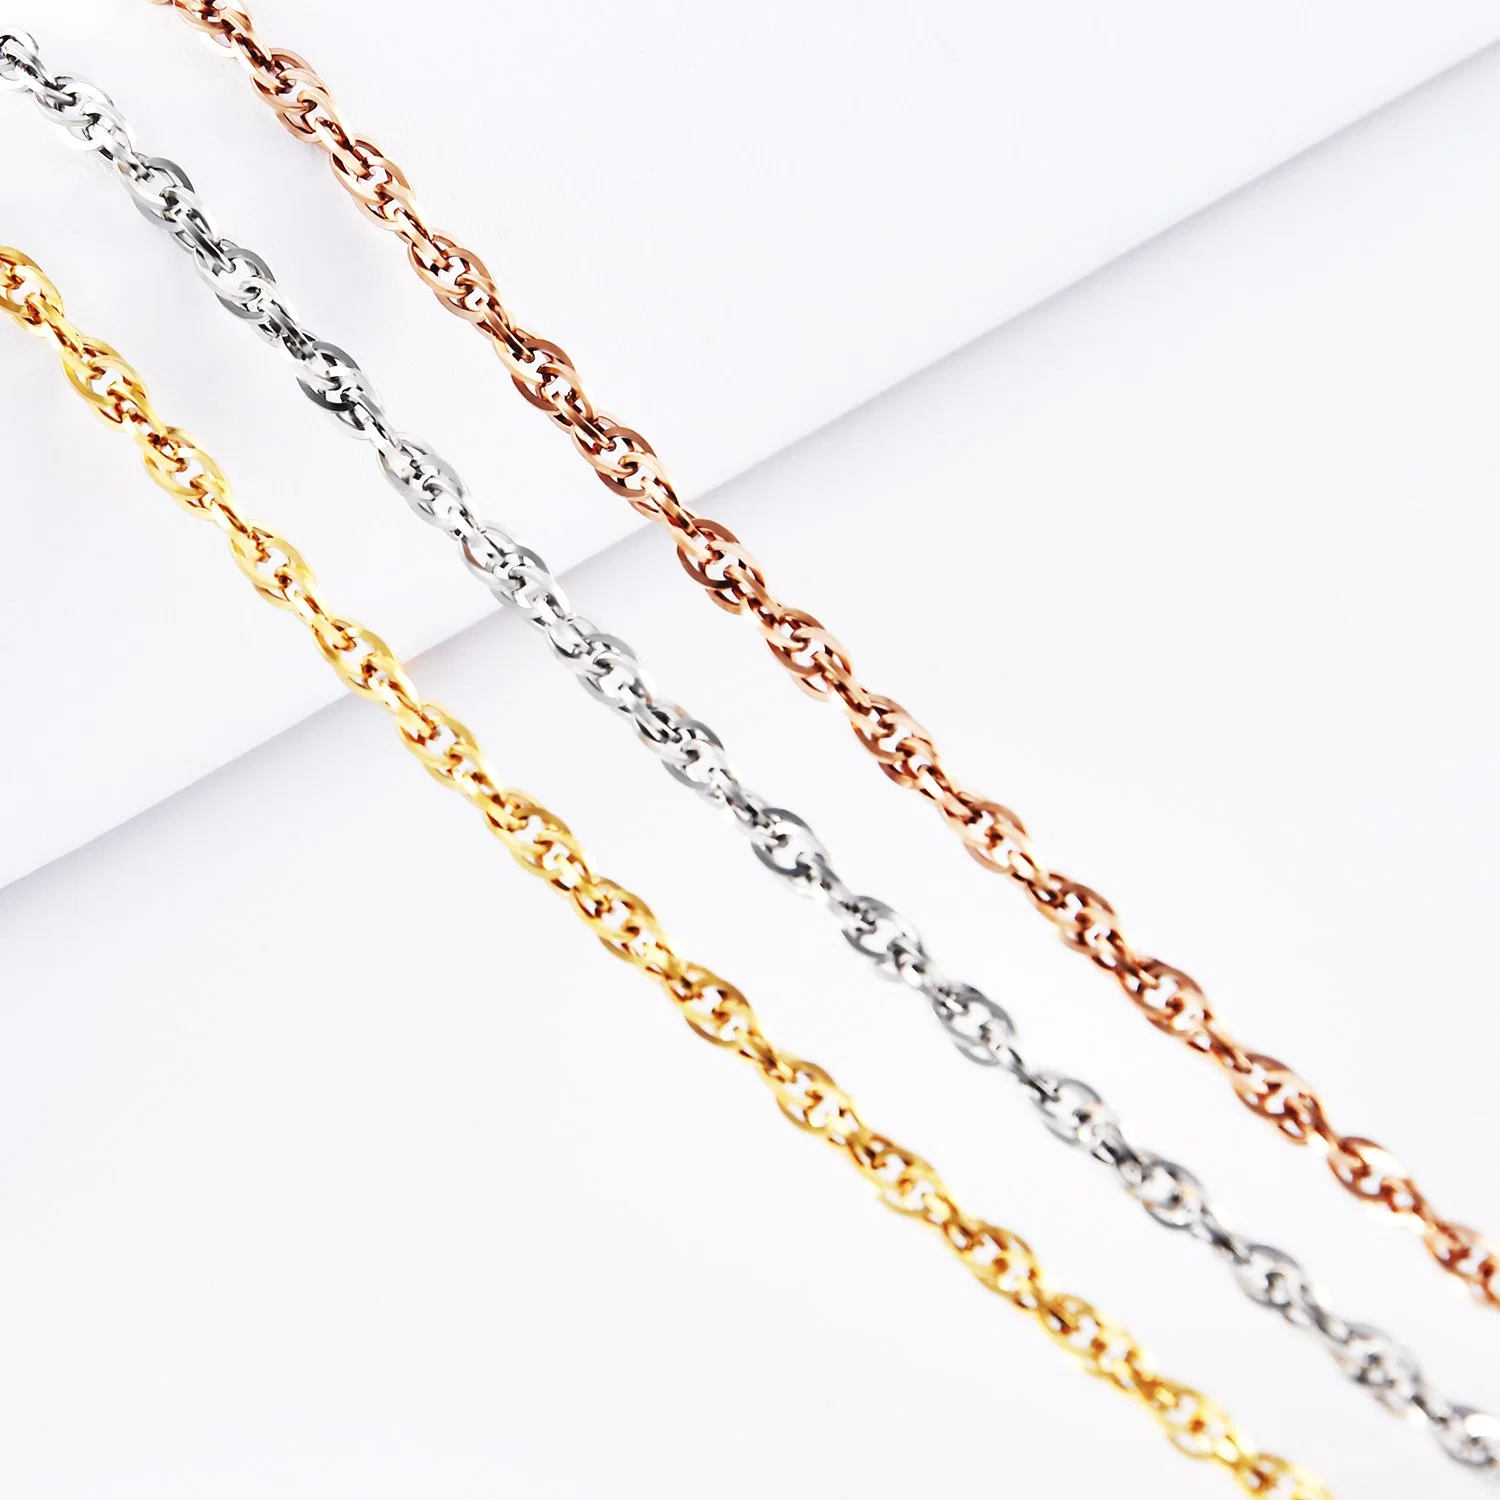 Hot Selling Gift Fashion Accessories Jewelry Stainless Steel Necklace Anklet Bracelet Gold Plated